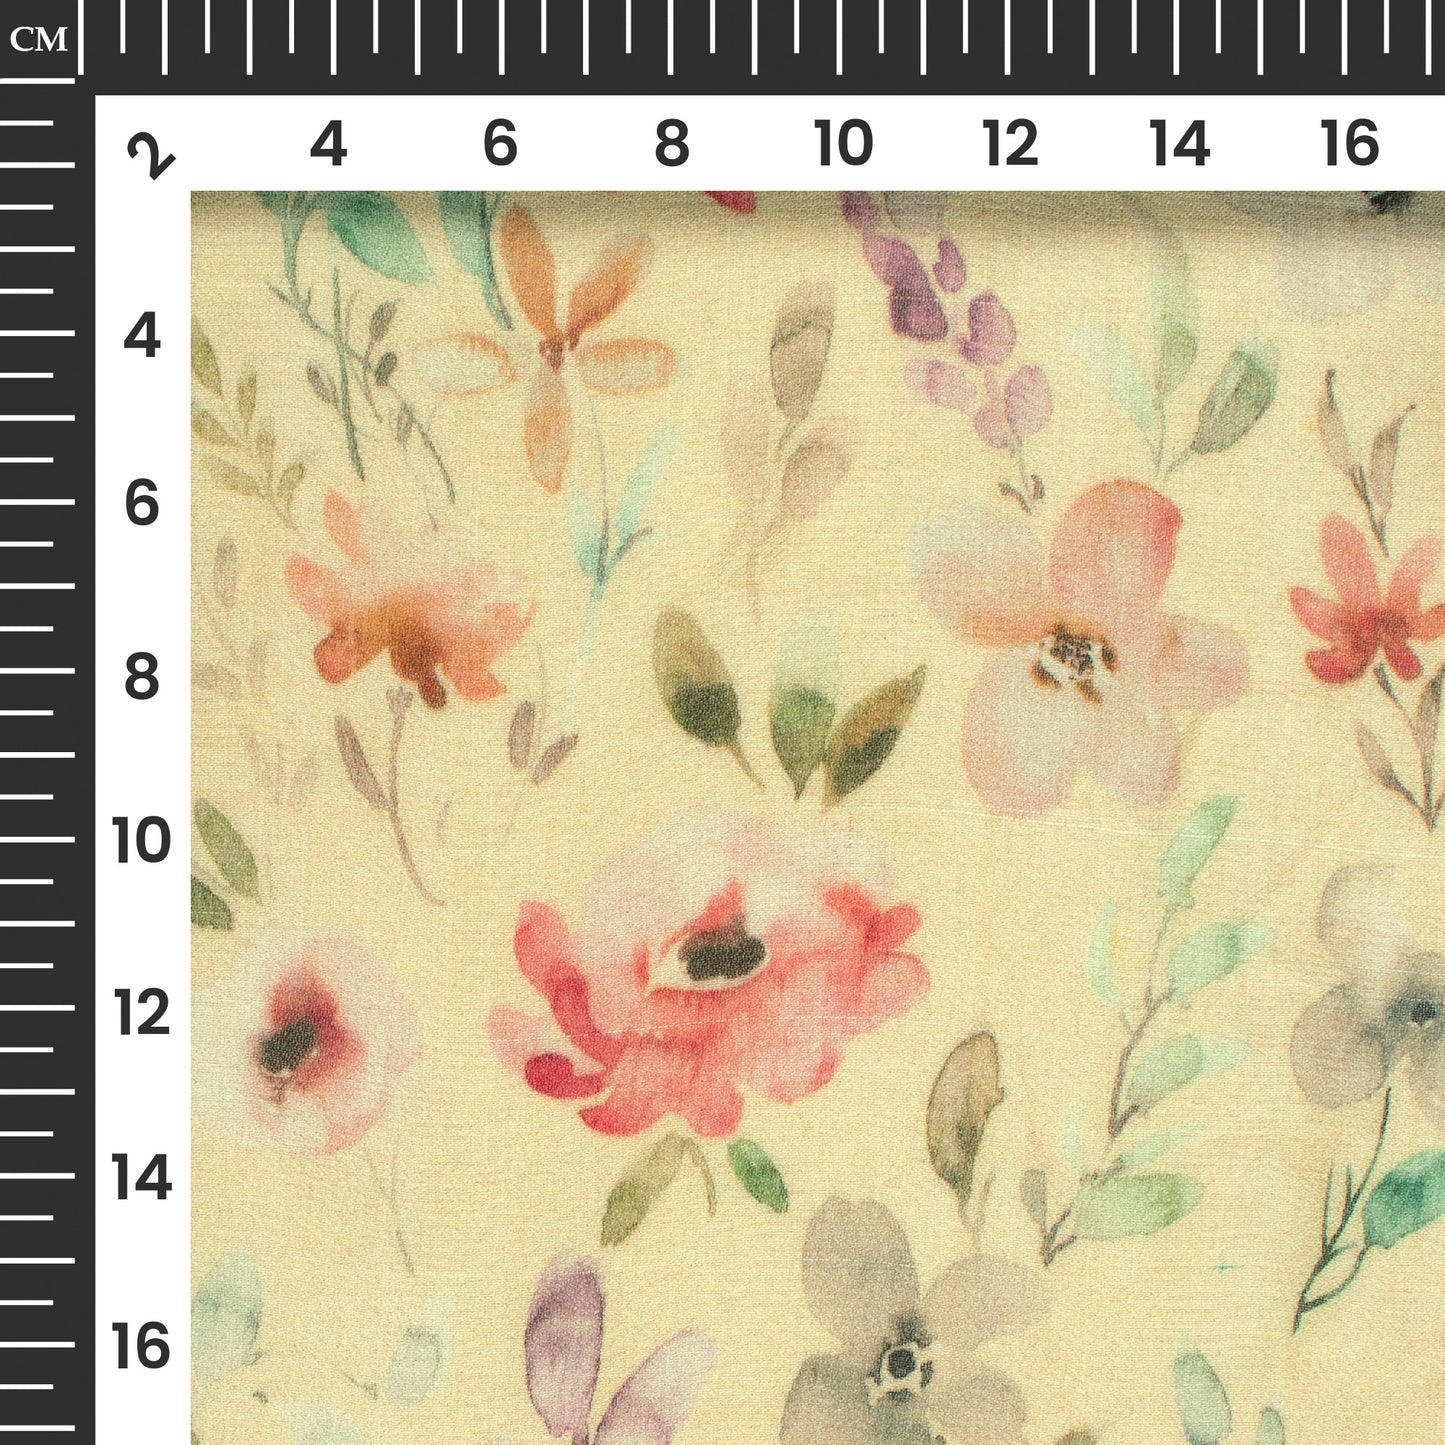 Salmon Pink And Cream Floral Digital Print Pure Georgette Fabric